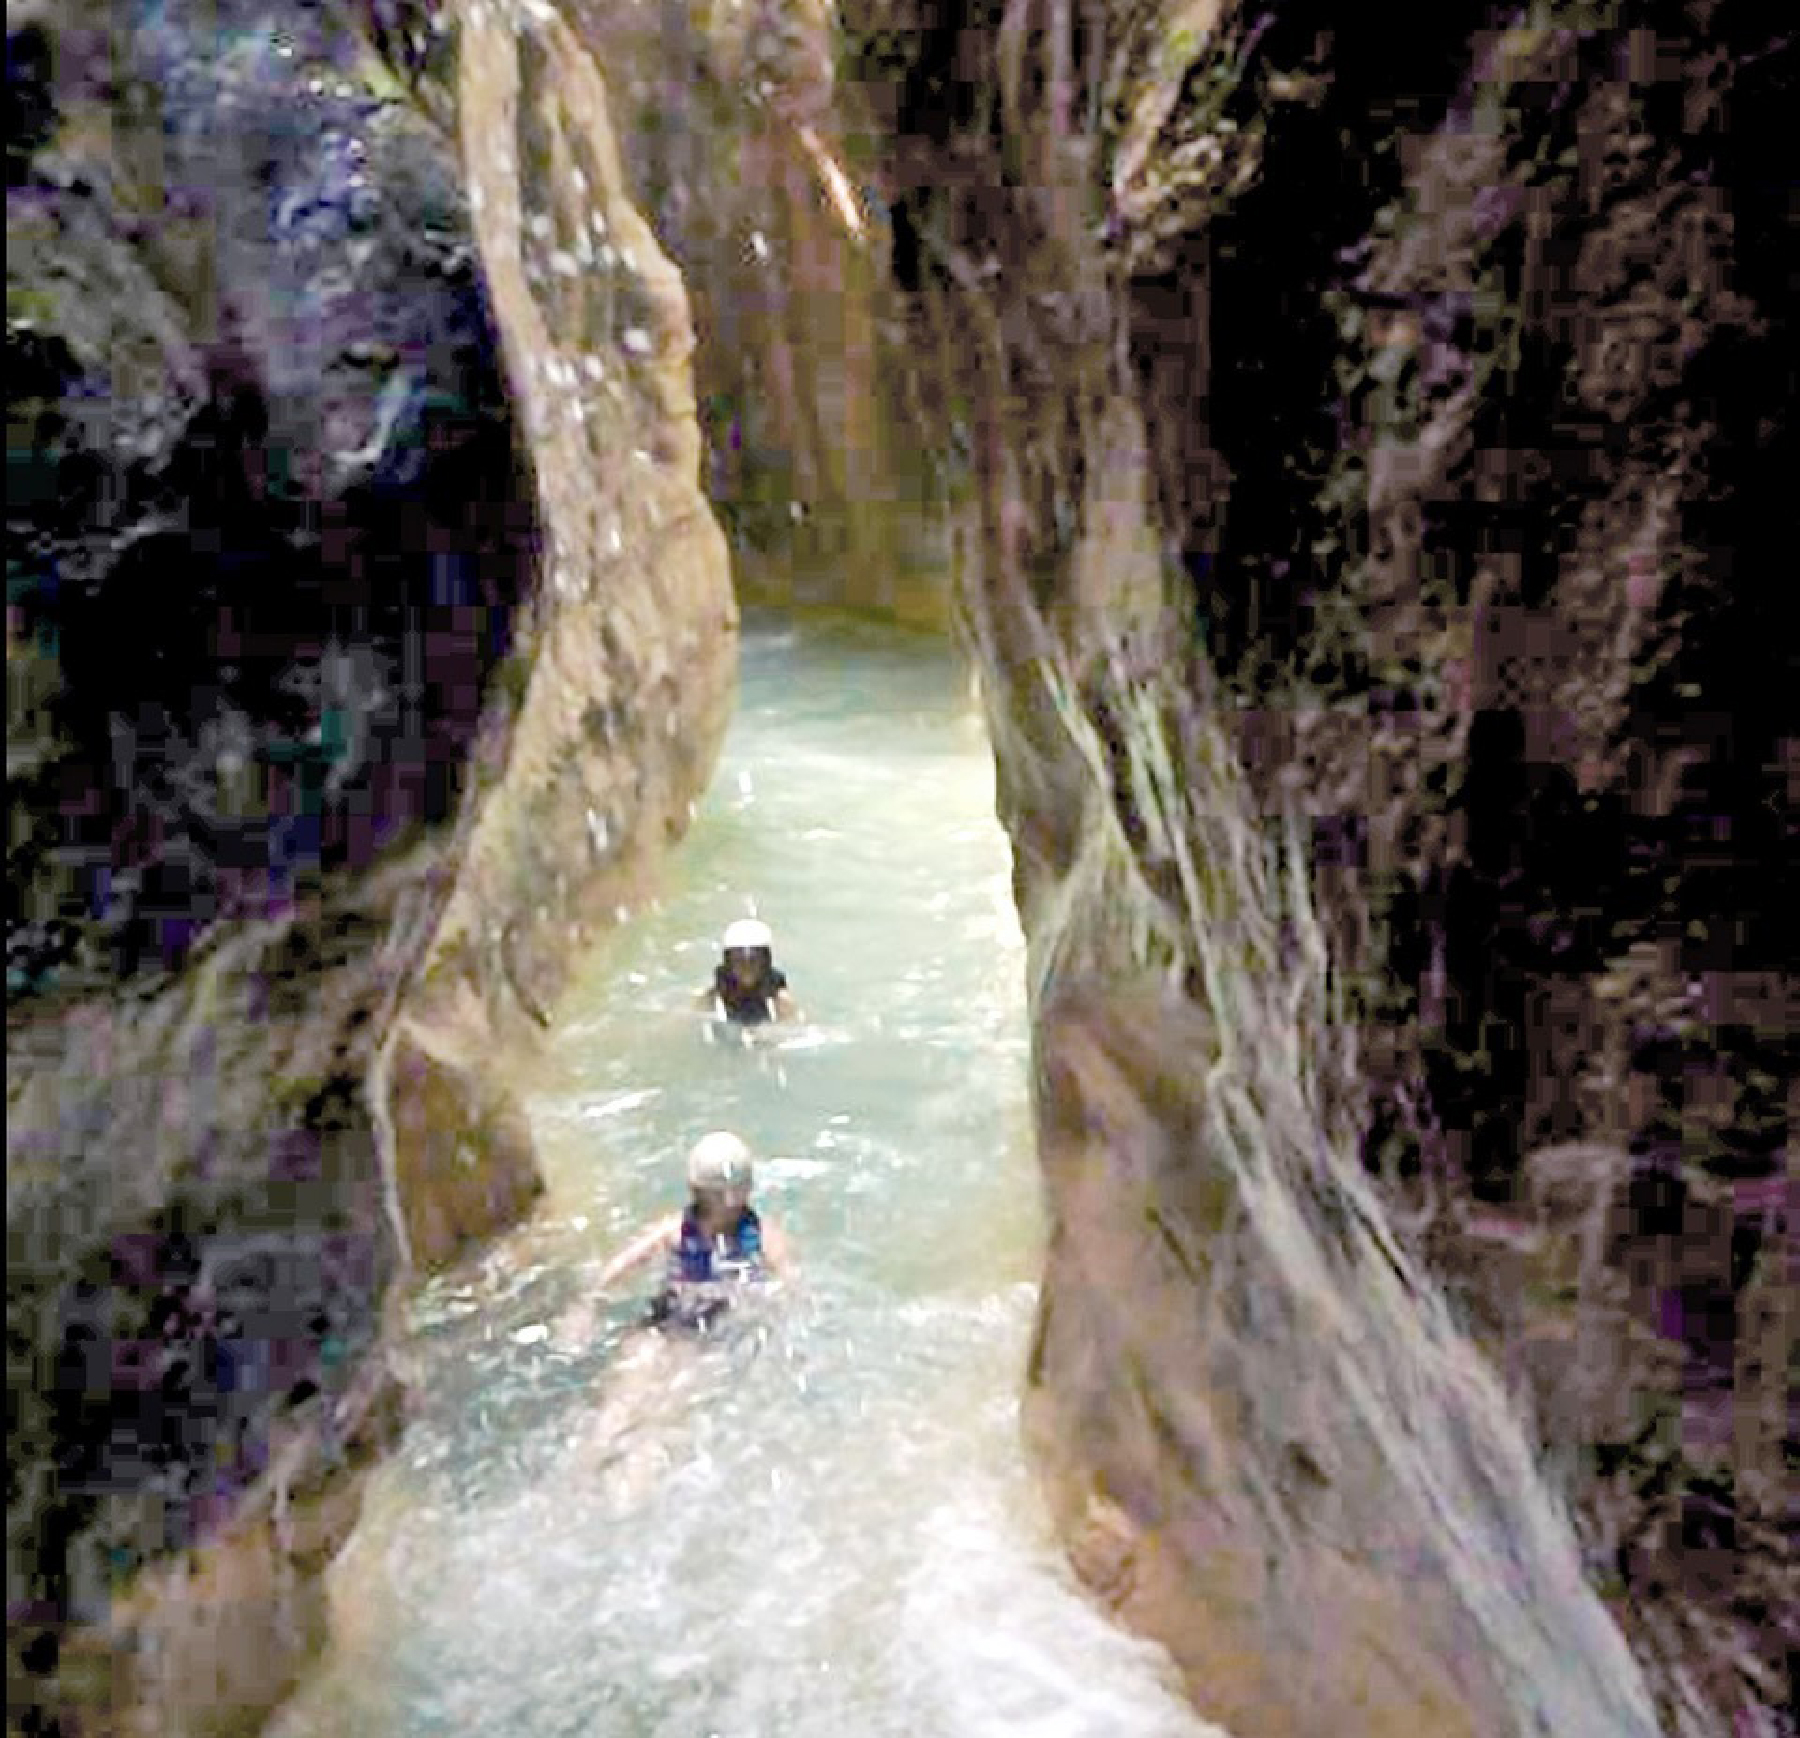 Swimming in caves is a popular activity at Puerto Plata in the Dominican Republic.